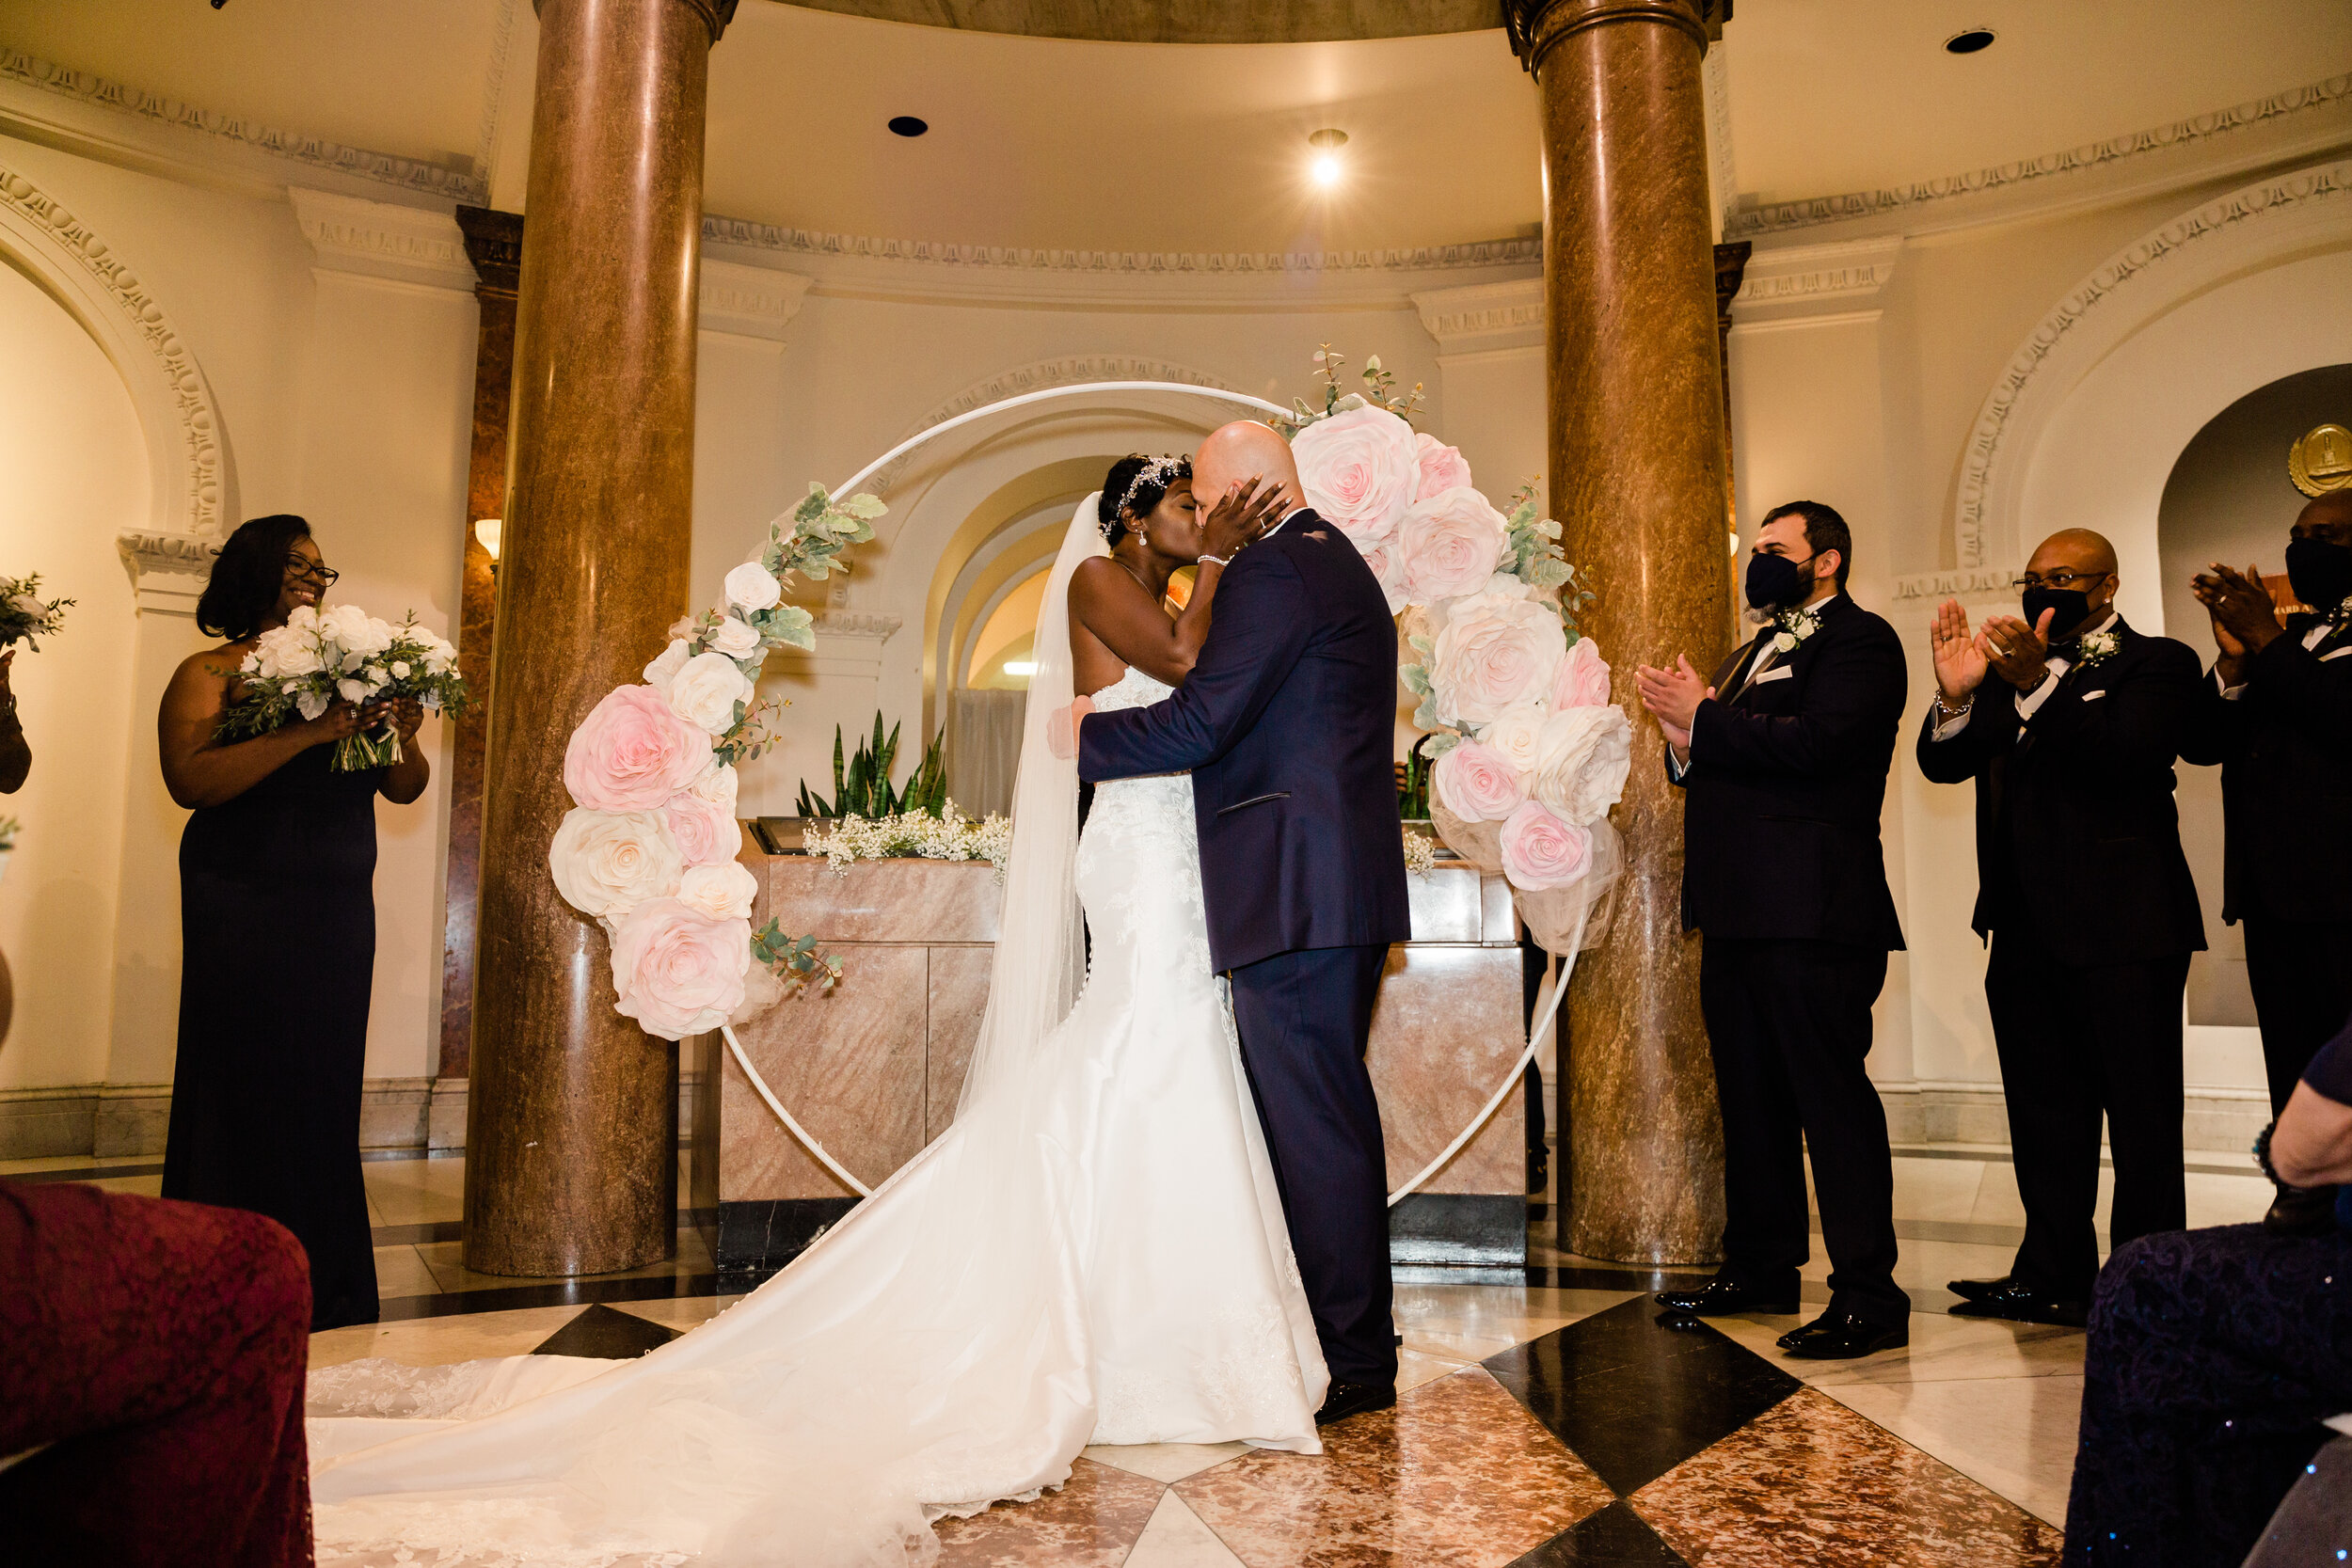 get married in baltimore city hall shot by megapixels media biracial couple wedding photographers maryland-73.jpg